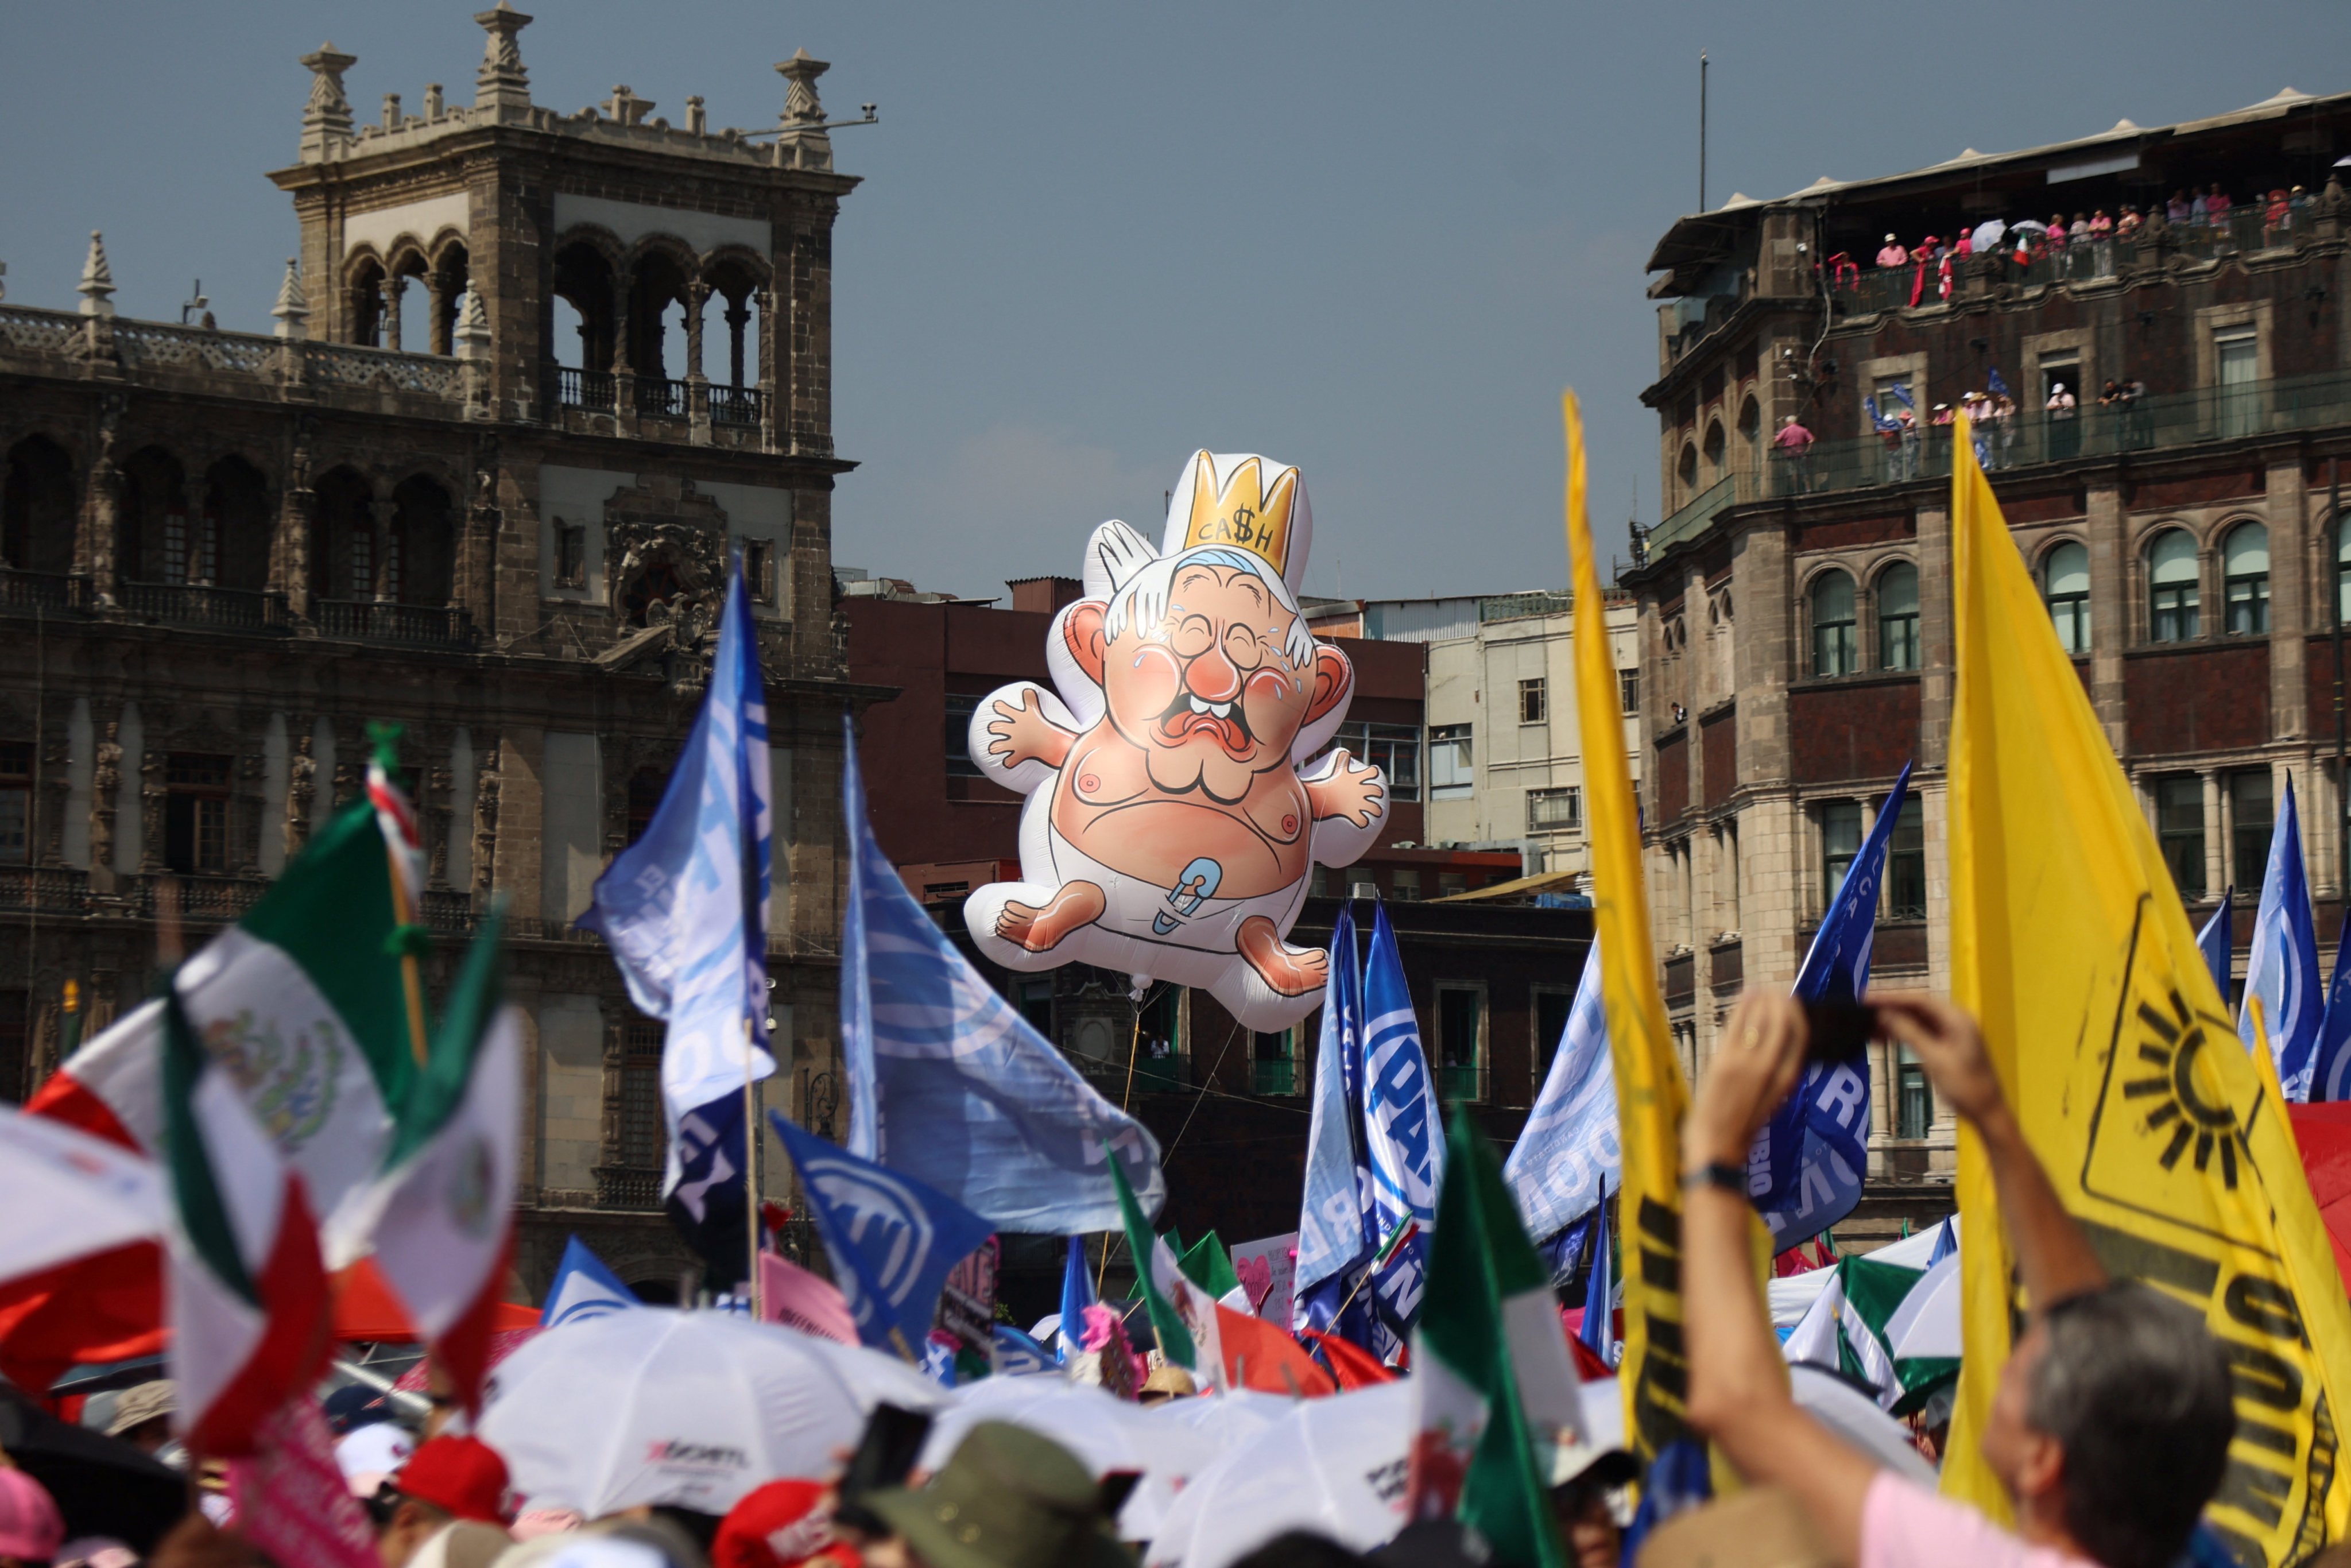 A balloon depicting Mexico’s President Andres Manuel Lopez Obrador at a protest in Mexico City’s Zocalo Square on Sunday. Photo: Reuters